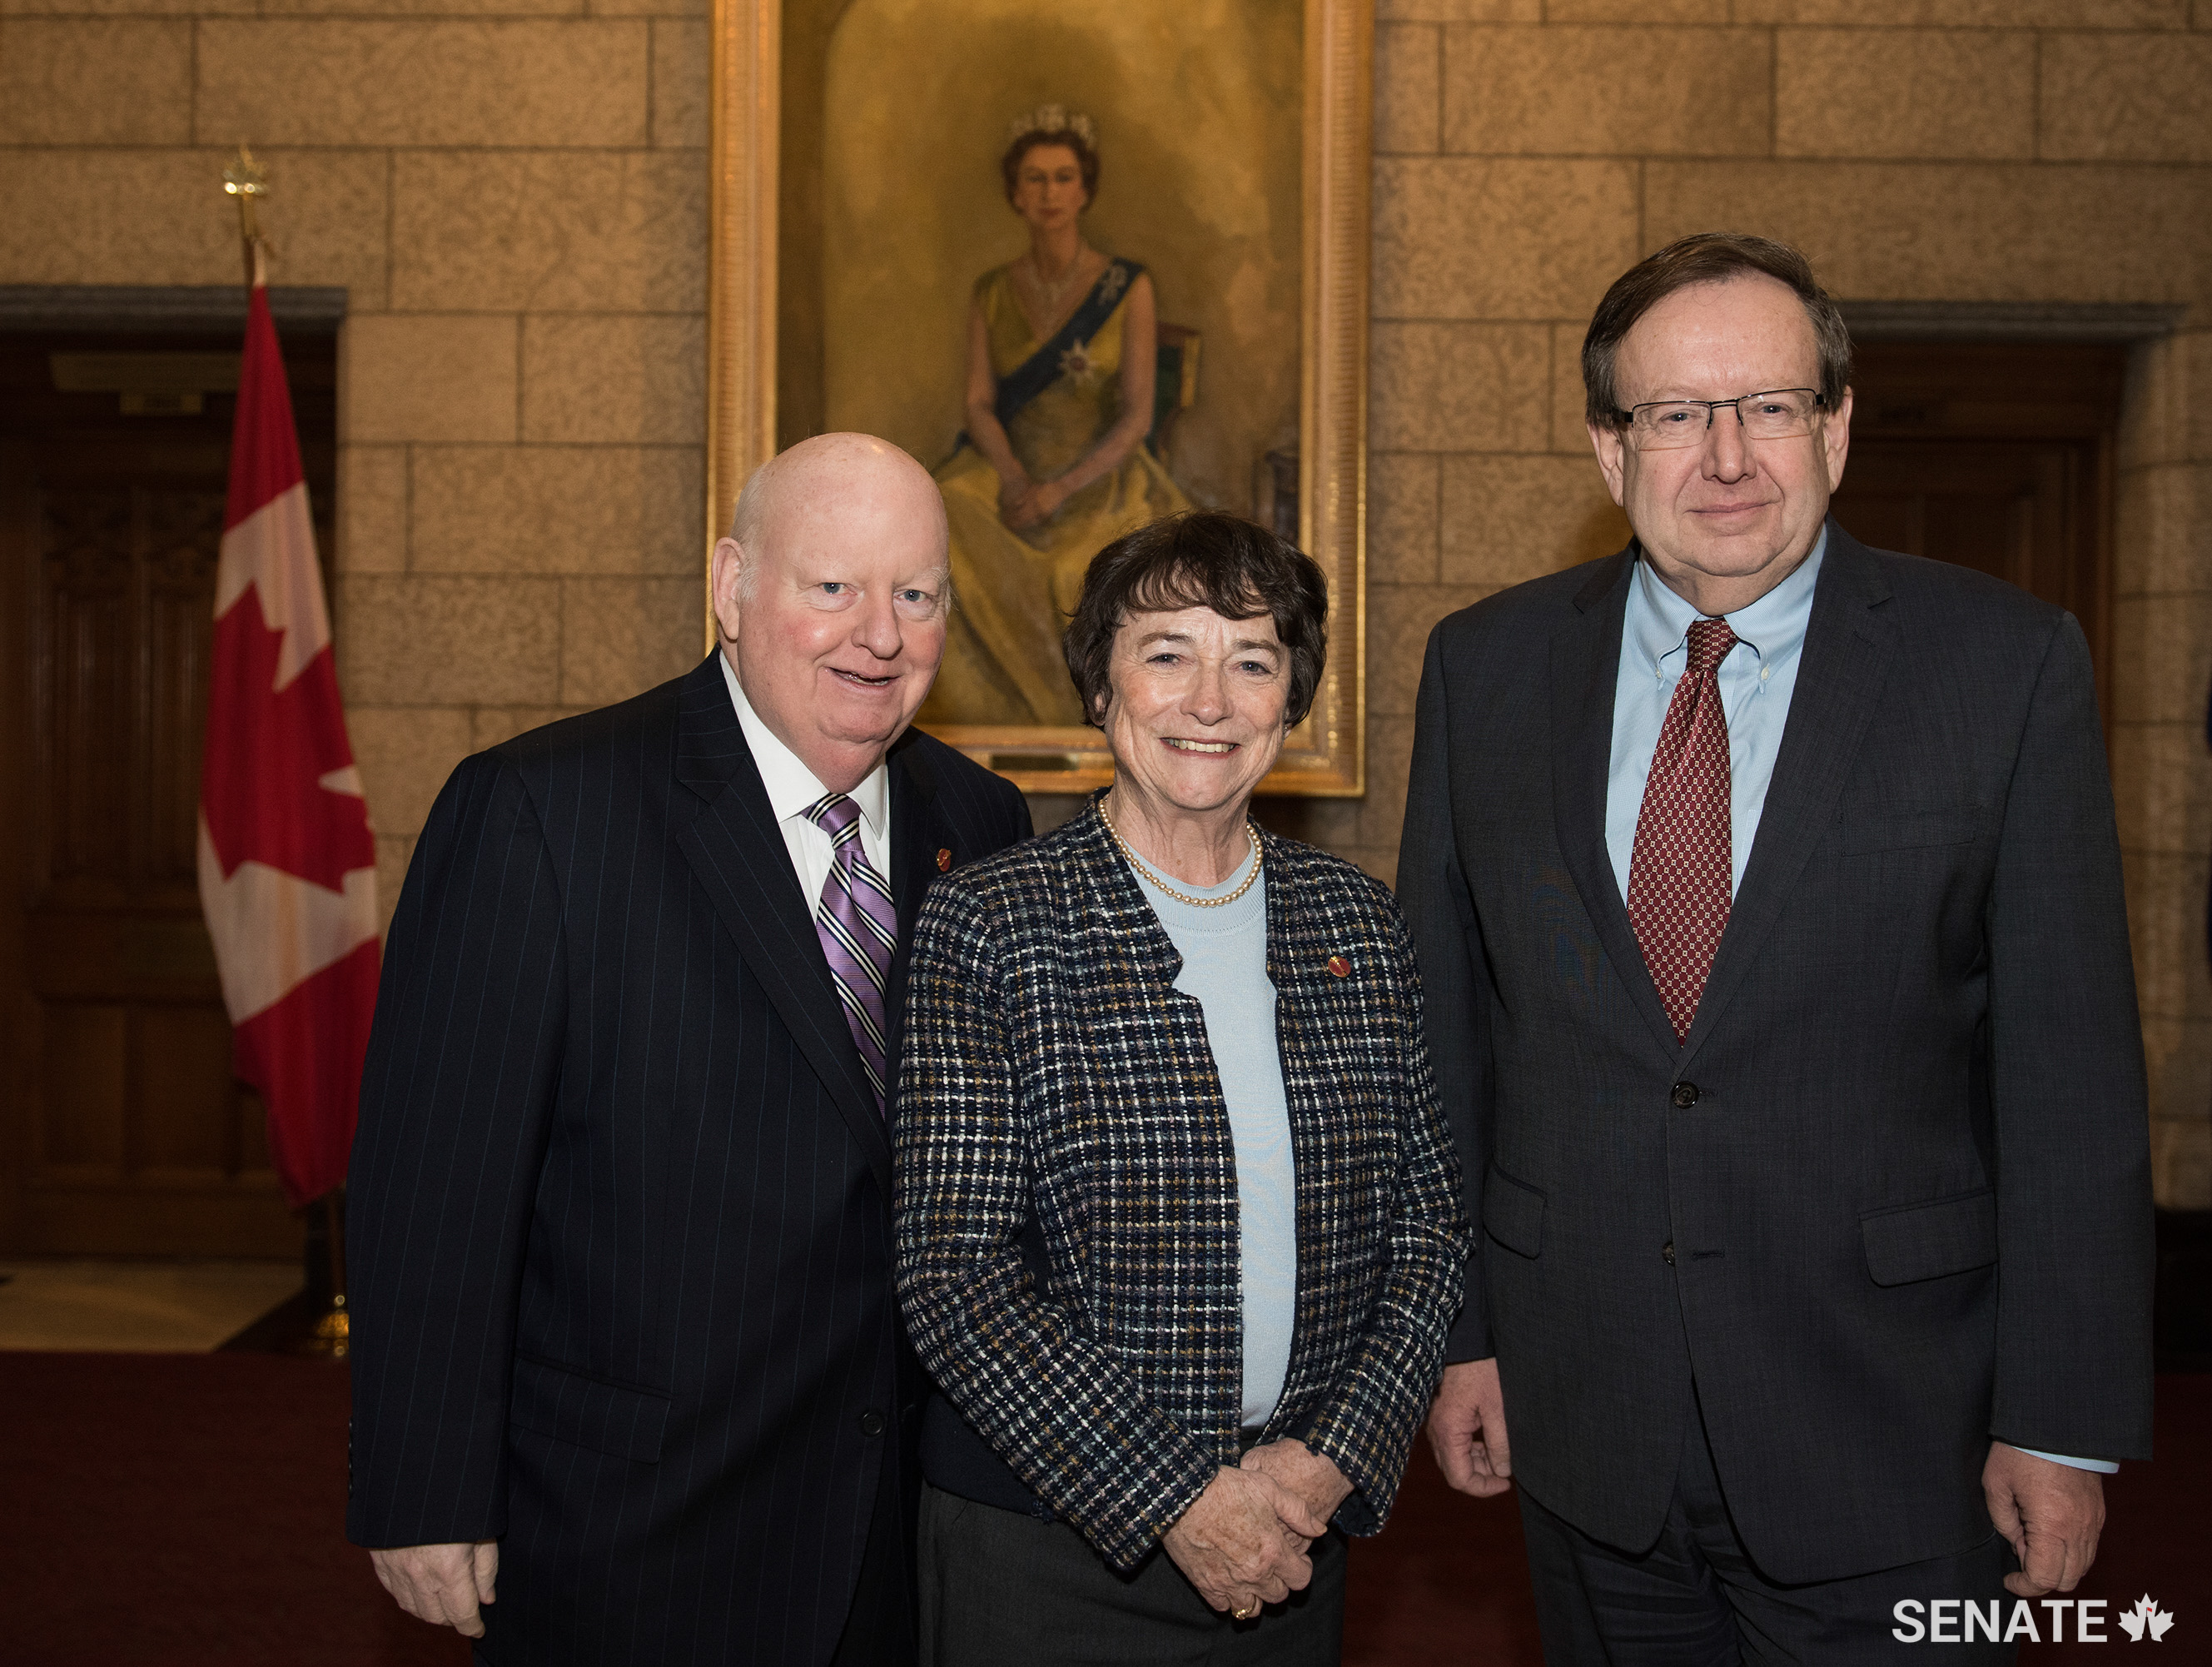 PEI Senators Mike Duffy, Diane Griffin and Percy E. Downe gather to celebrate the granting of Royal Assent to <a href='https://www.parl.ca/LegisInfo/BillDetails.aspx?billId=8766295&Language=E'>Bill S-236</a>, which recognizes Charlottetown as the birthplace of Confederation. Senator Griffin was the Senate sponsor of the bill.